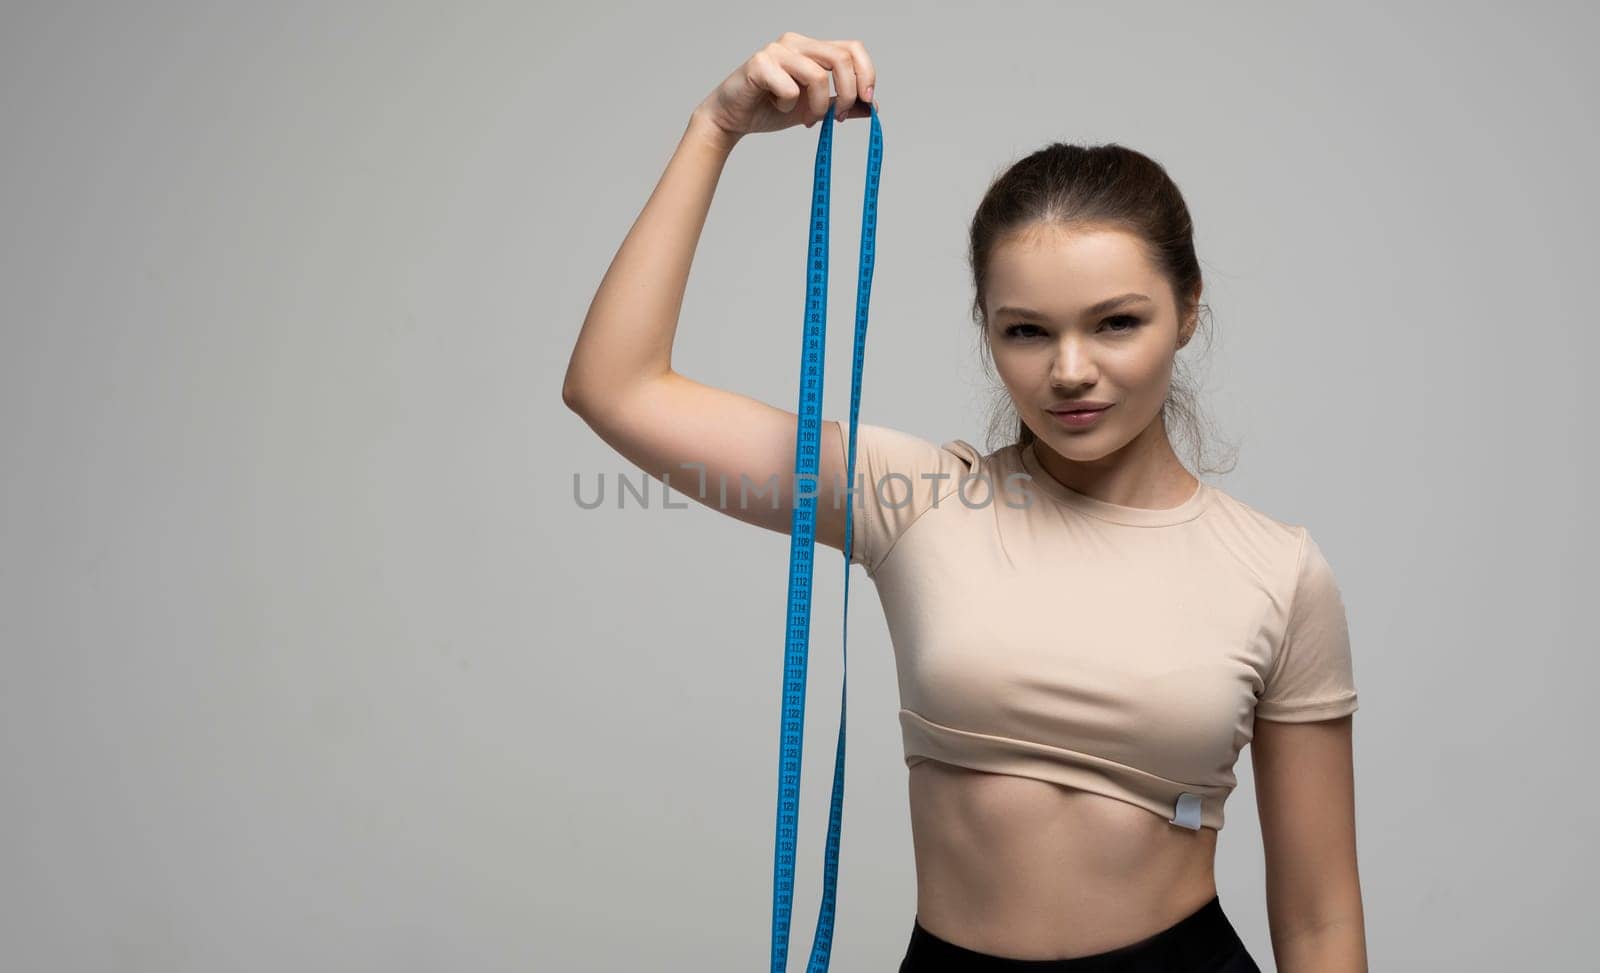 Brunette woman in a sport wear with a blue measuremt tape after her body measurements on white background. Healthy lifestyles concept